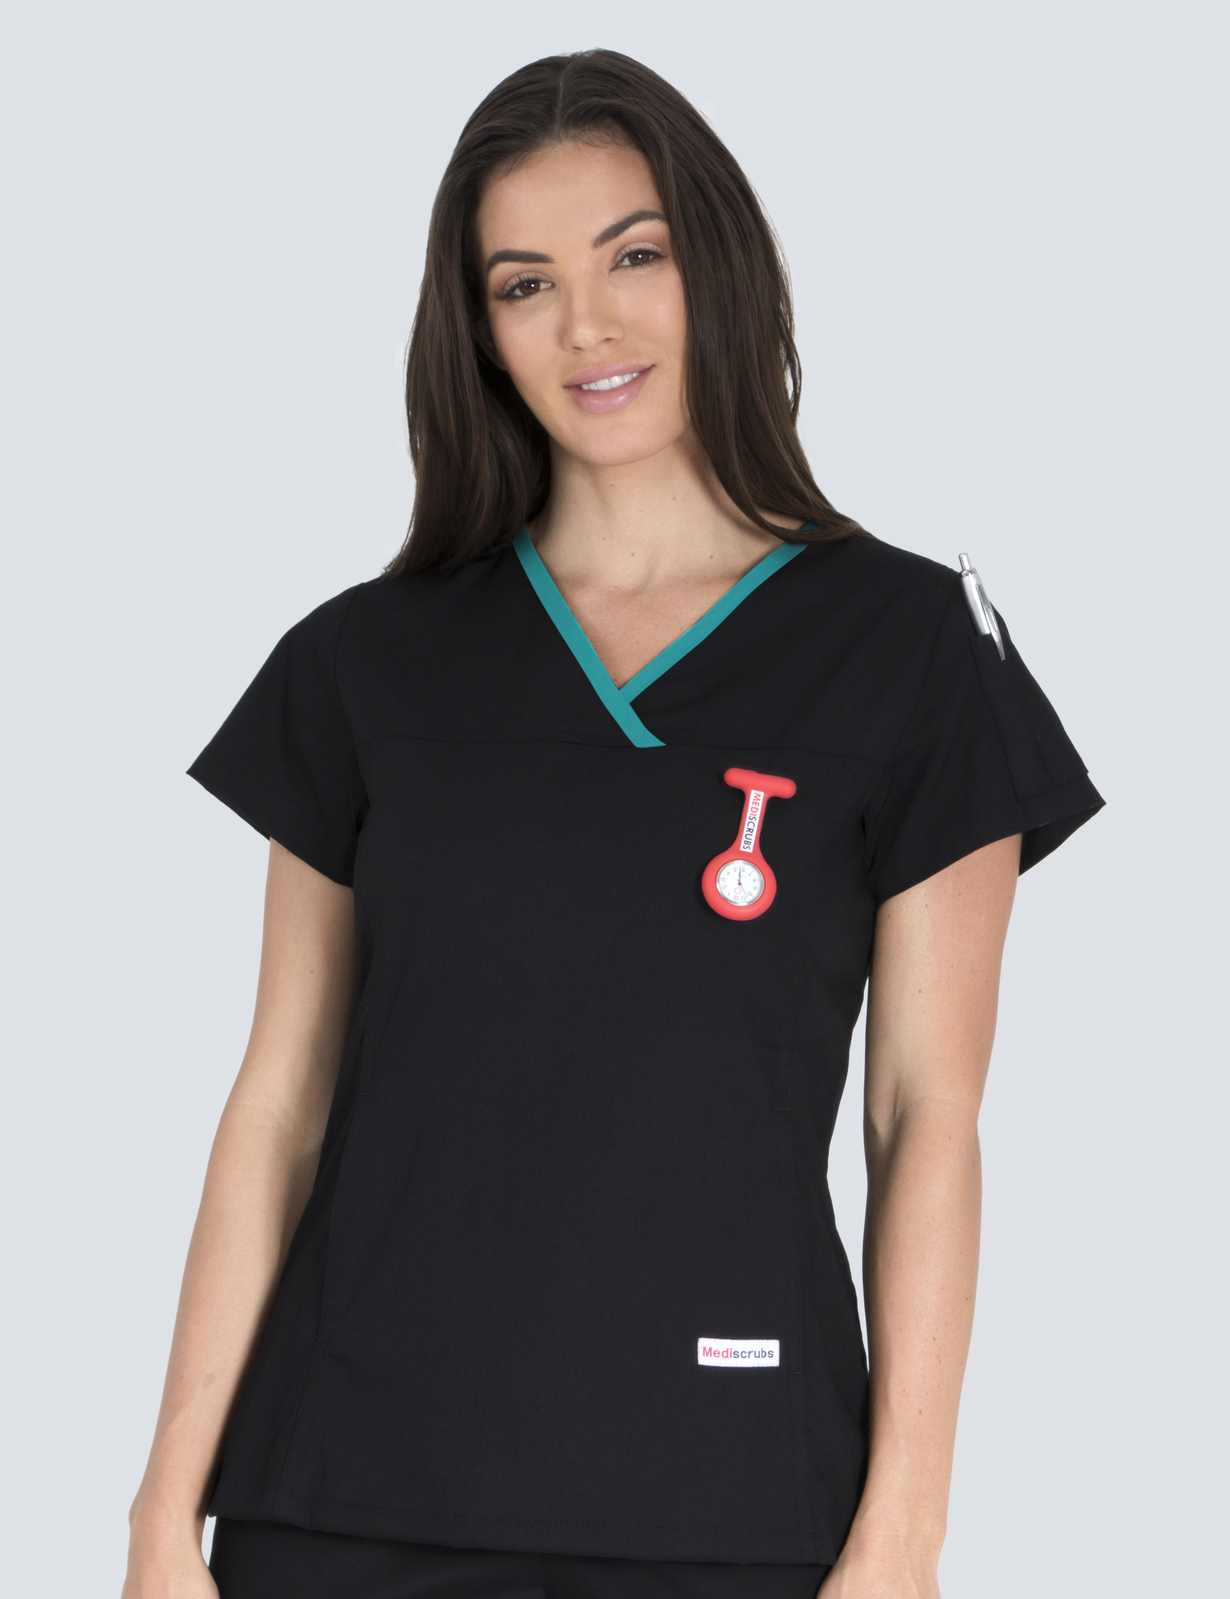 Caboolture Hospital - ICU NUM (Women's Fit Solid in Black with Teal Trim incl Logos)